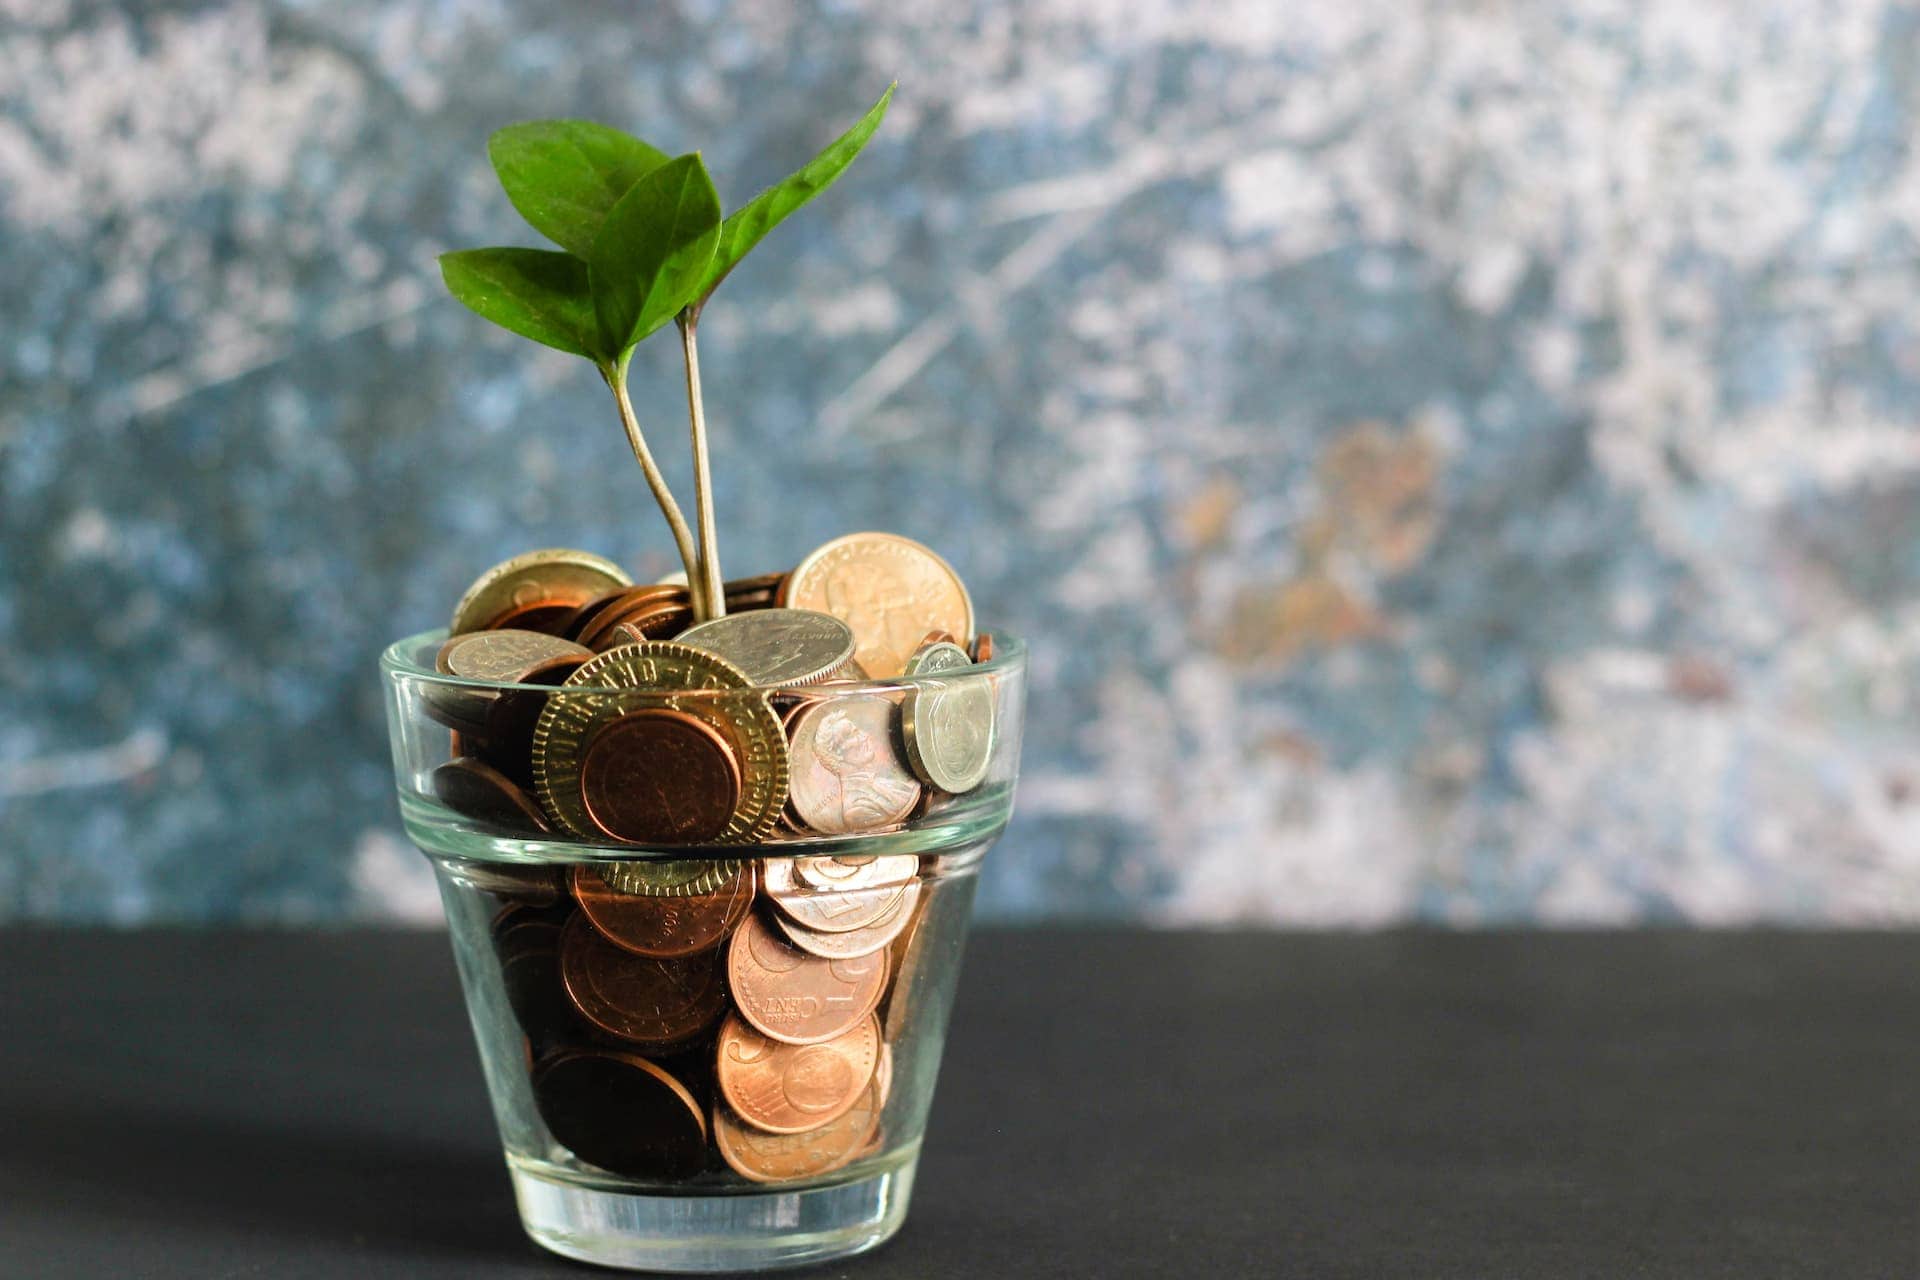 A glass jar on a table full of coins with a baby plant growing out of the top.